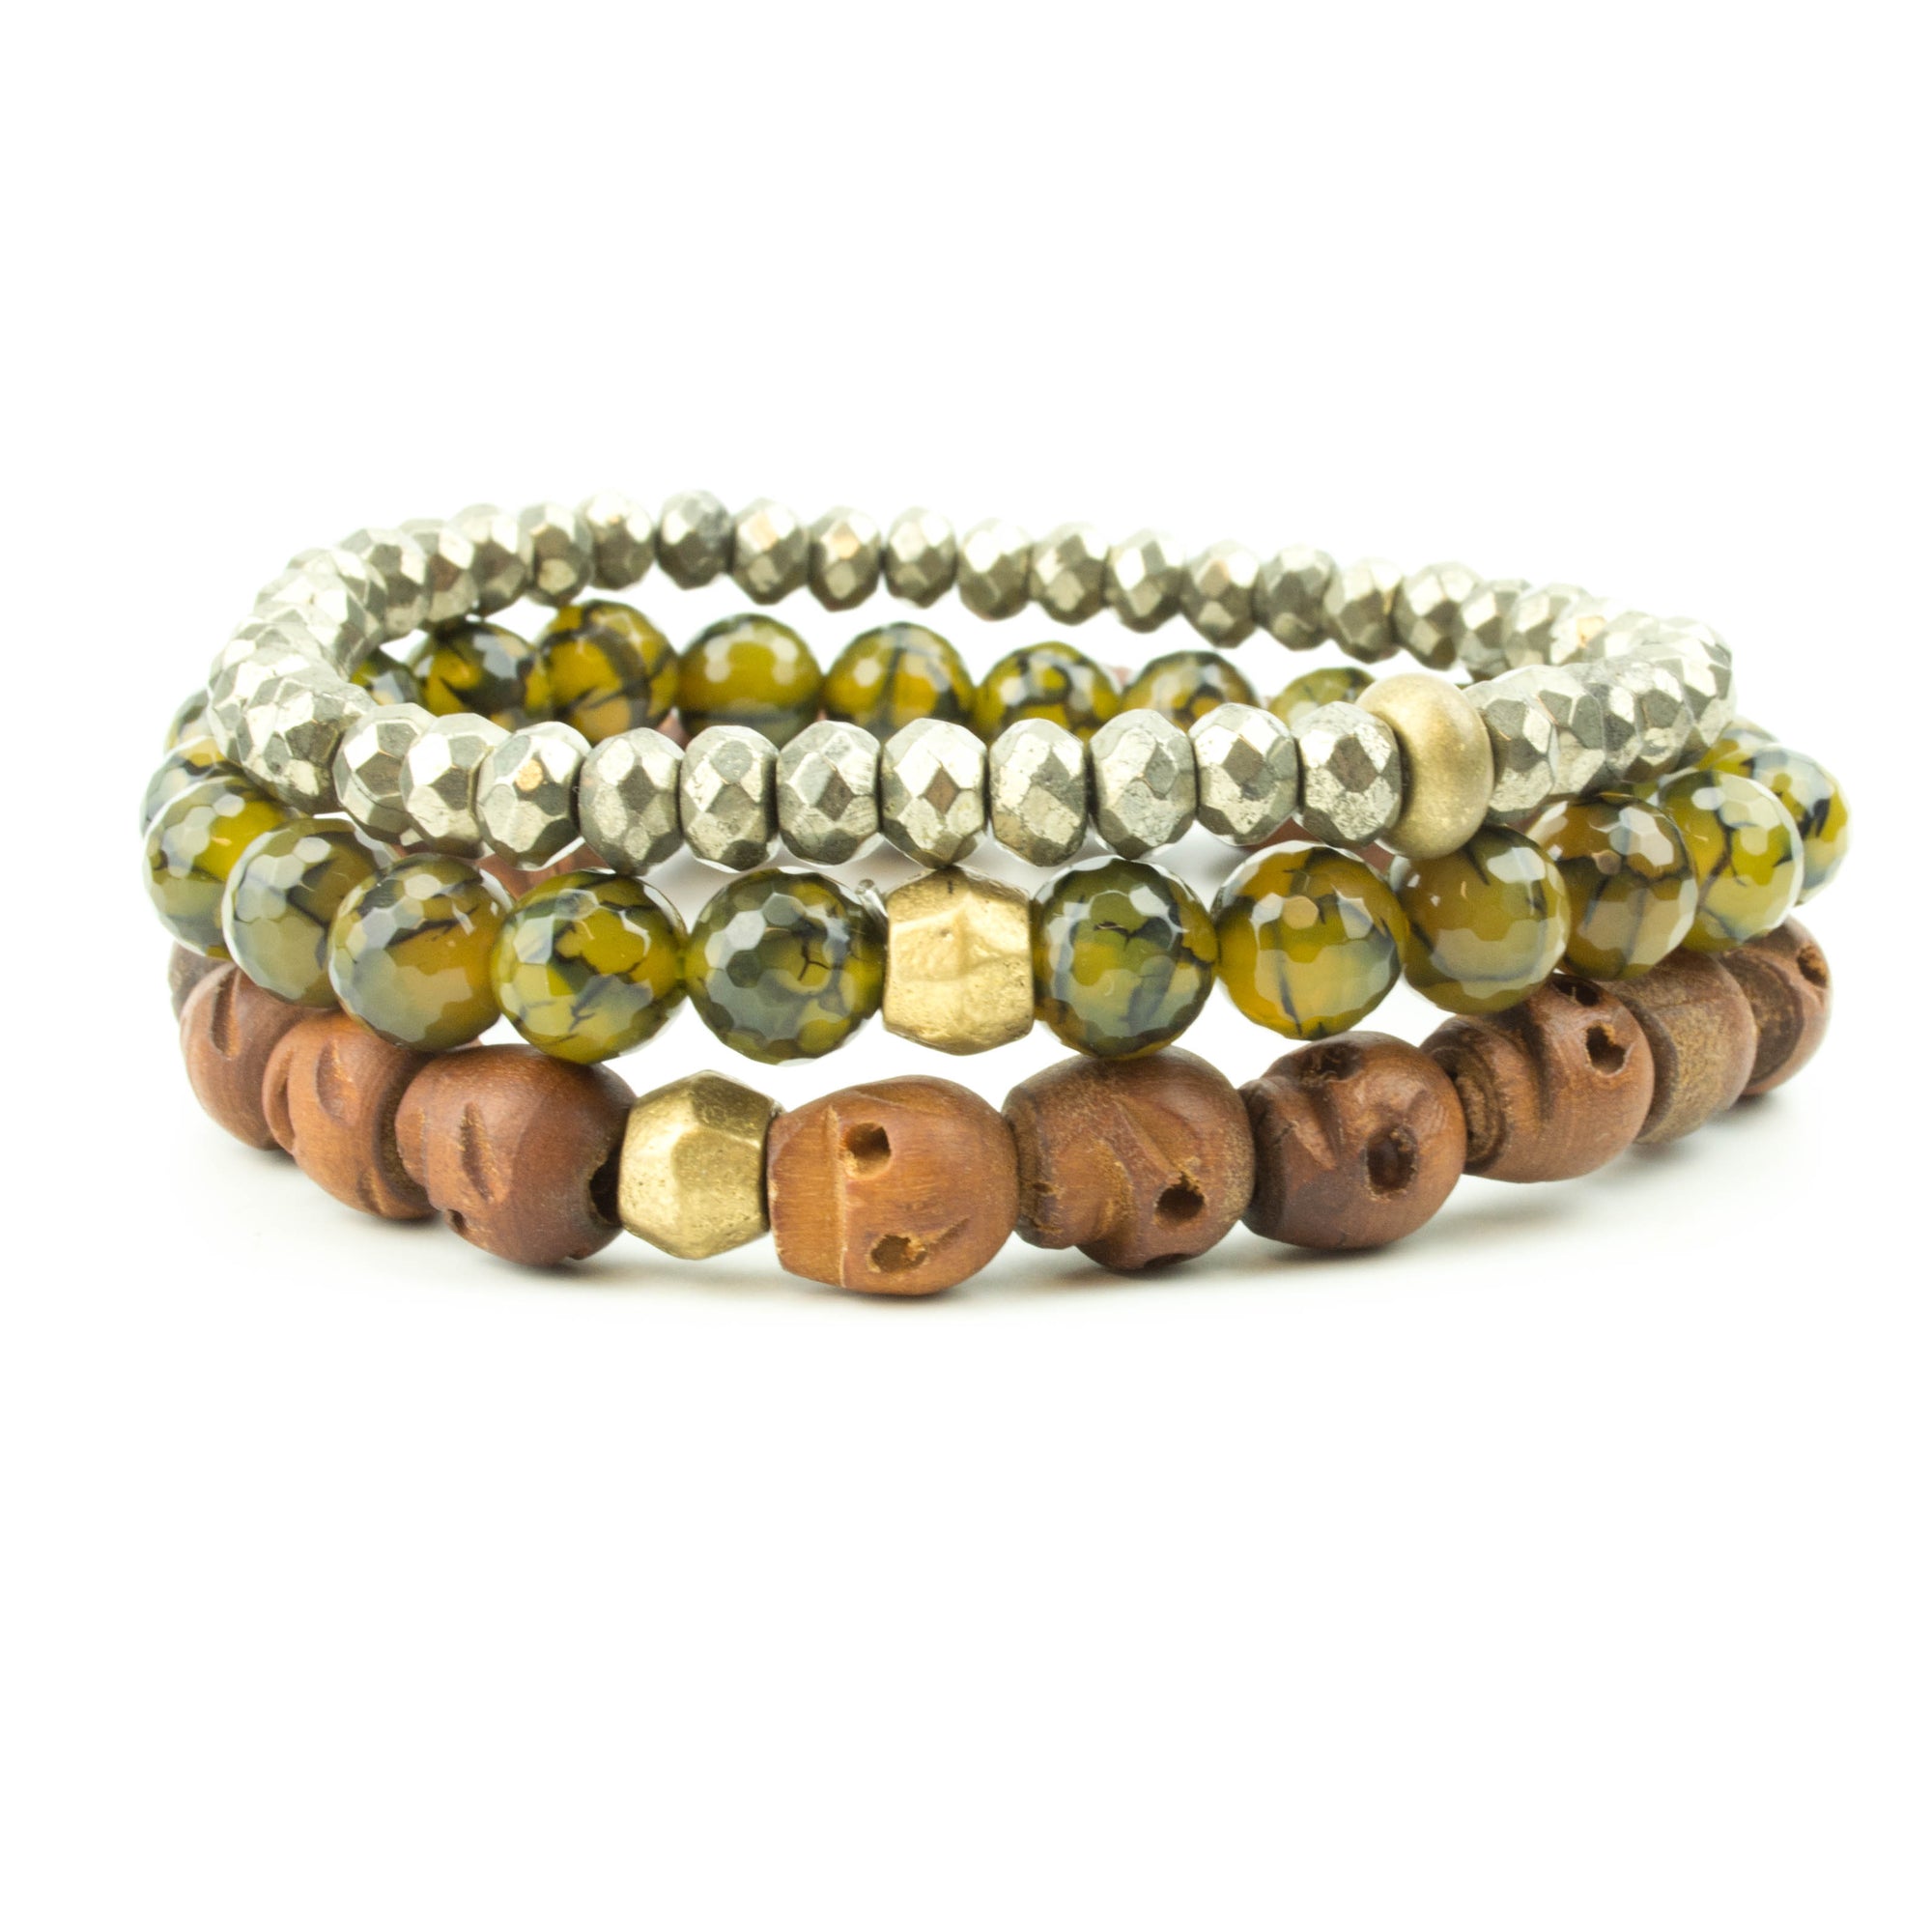 men's stretch beaded bracelet stack with woos skulls, pyrite and dragon's vein agate